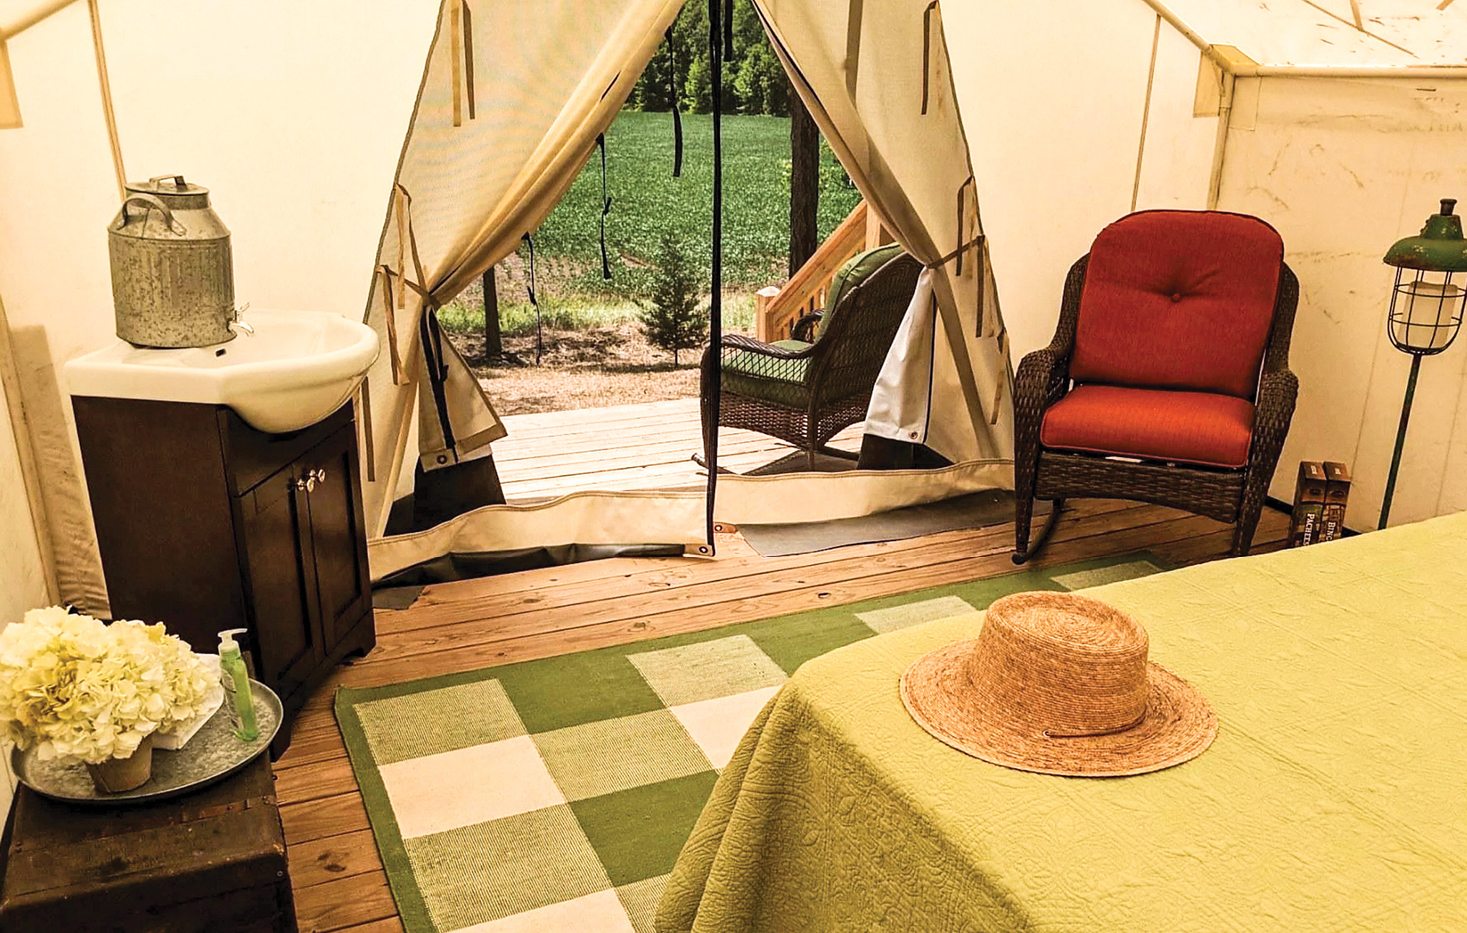 Interior of a luxury yurt with a rug, furniture, table and a door leading to the outdoors